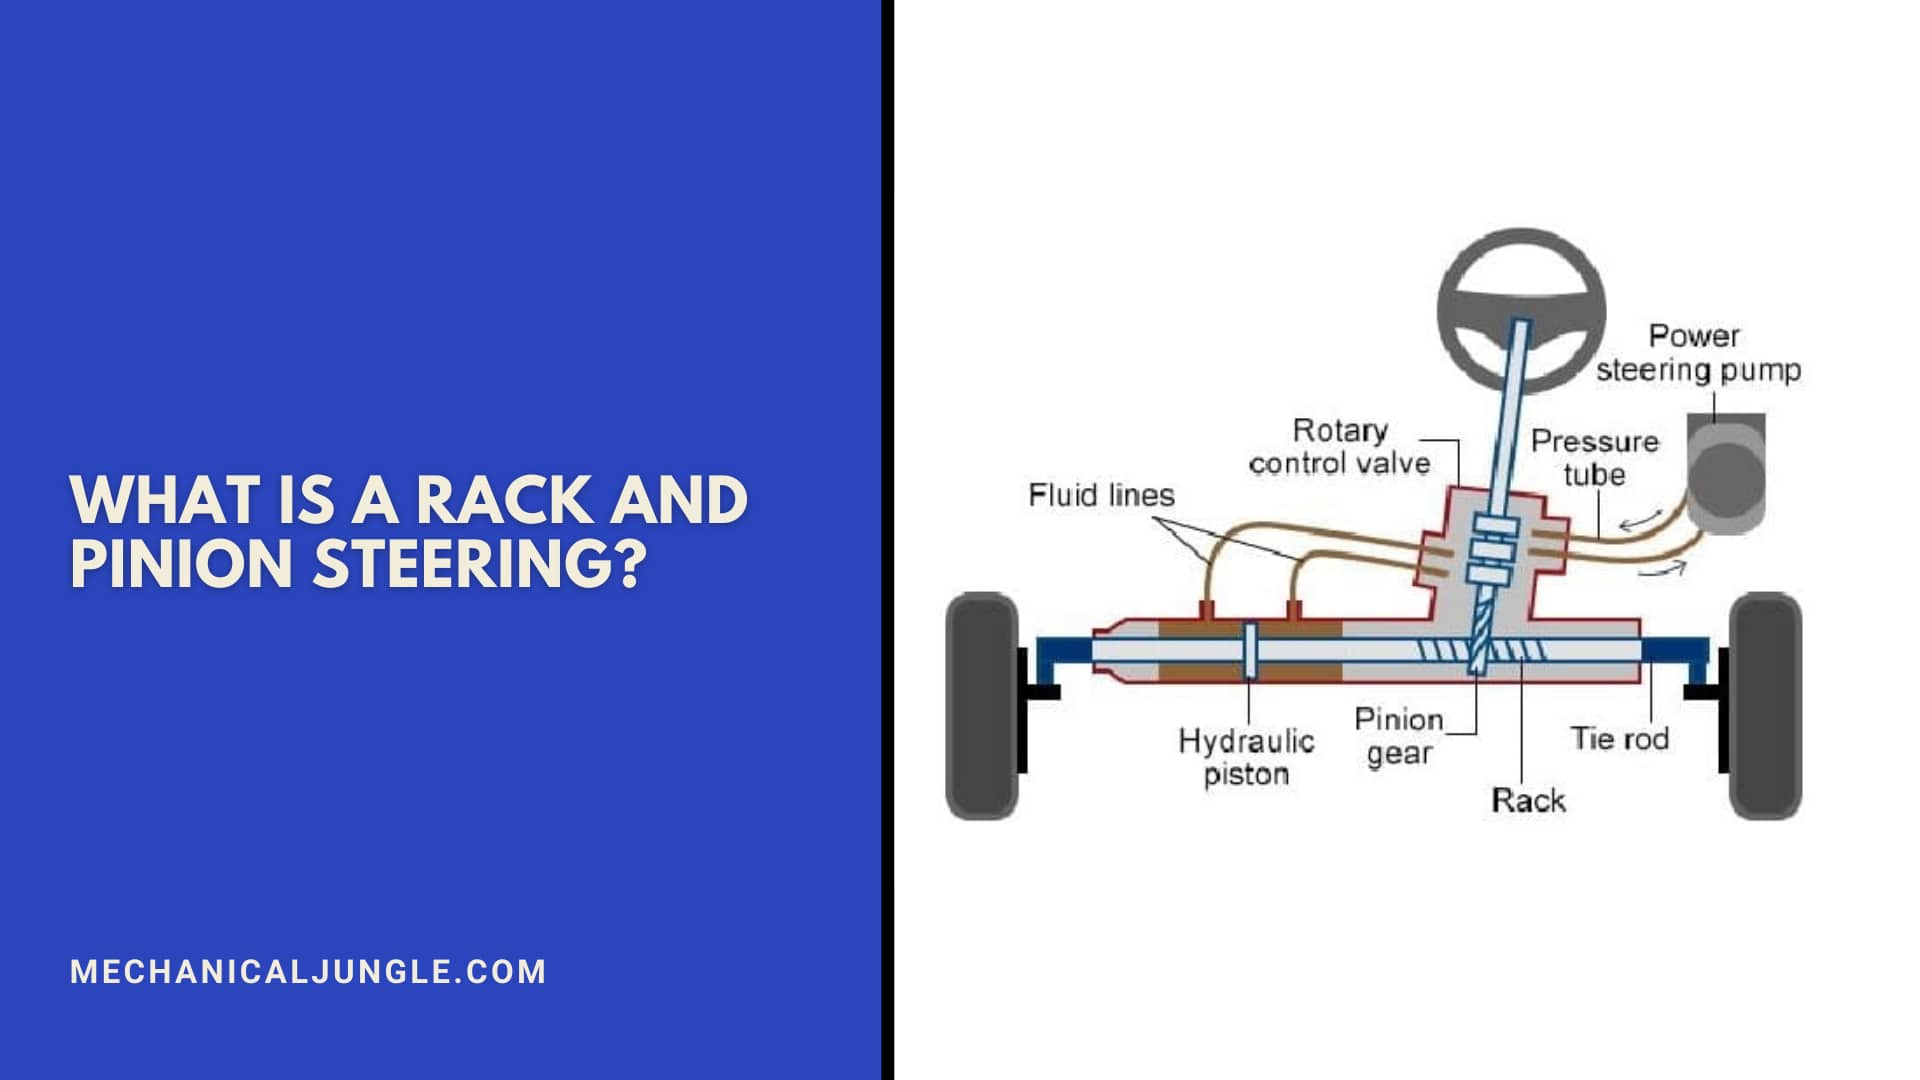 What Is a Rack and Pinion Steering?